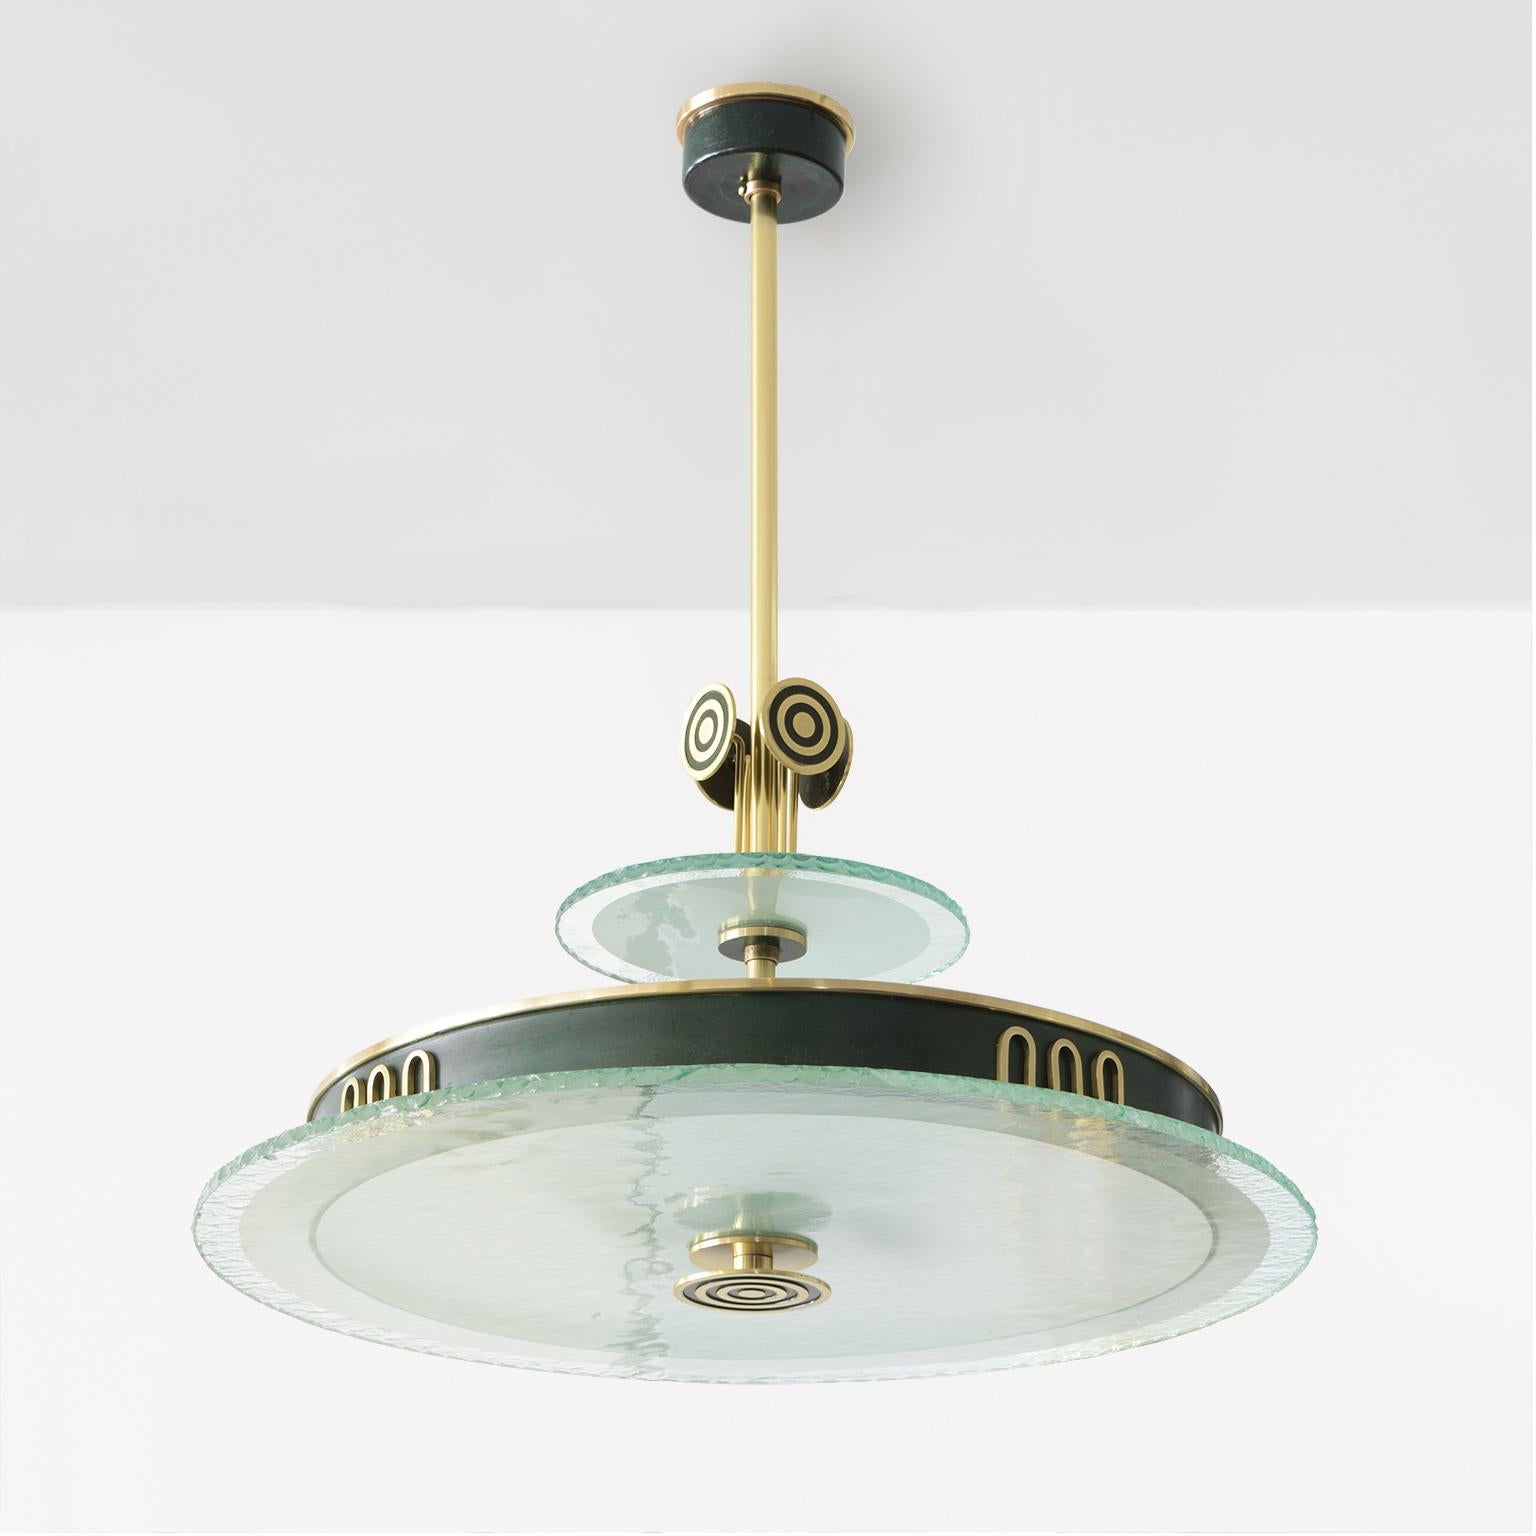 Swedish Art Deco patinated brass chandelier with polished brass details, made by Bohlmarks. Above the acid etch glass diffuser a stylized meander motif decorates the metal ring shade. A cluster of 4 modernist 